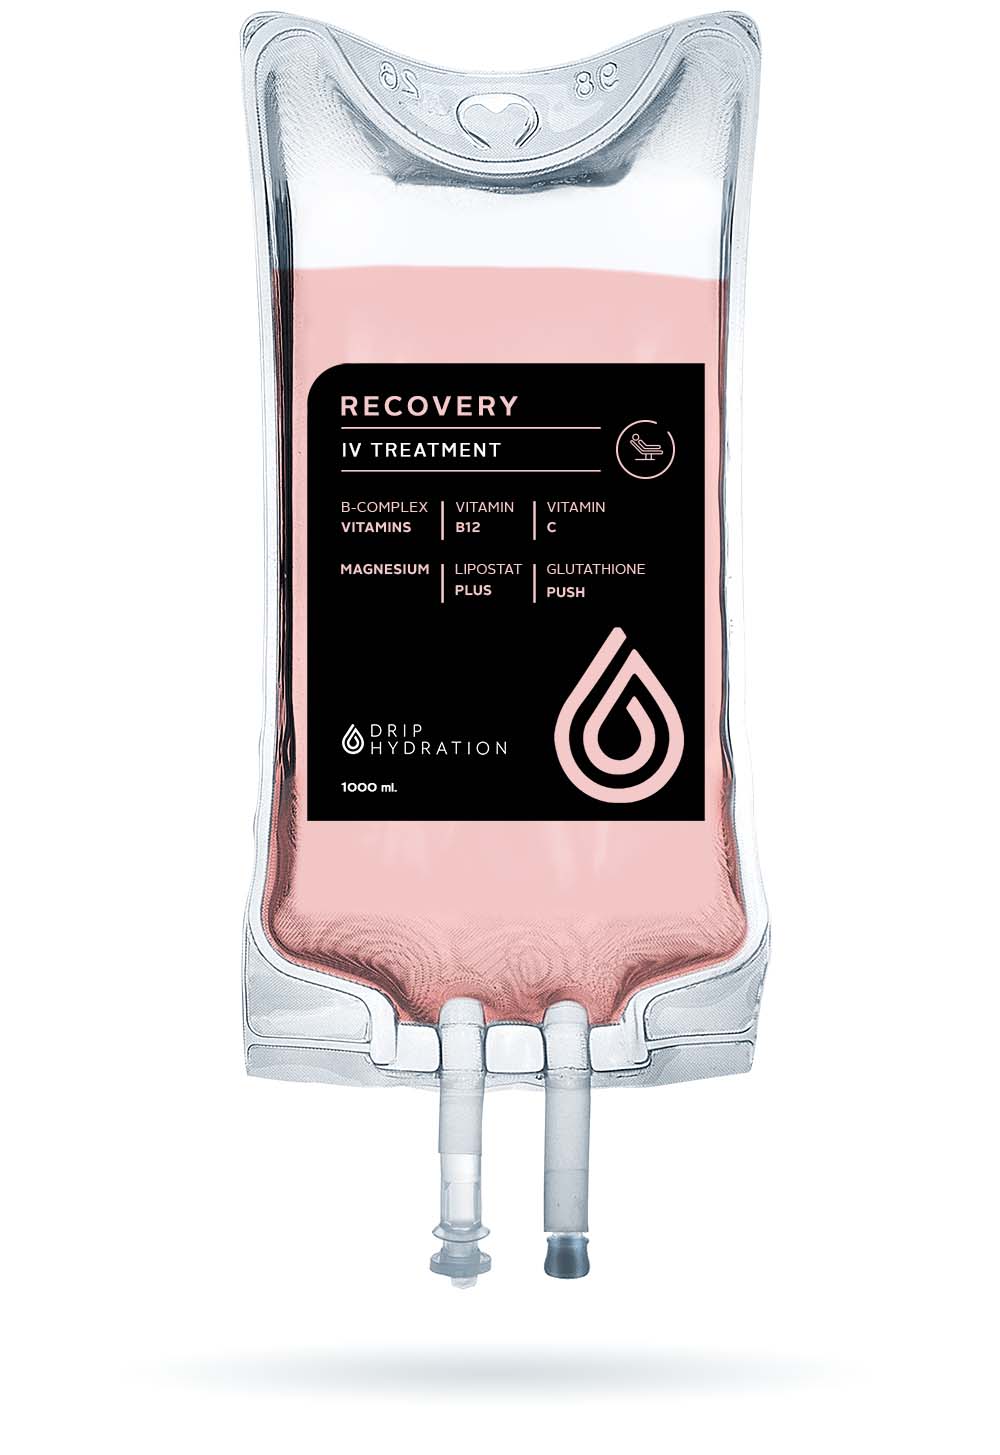 Recovery iv treatment